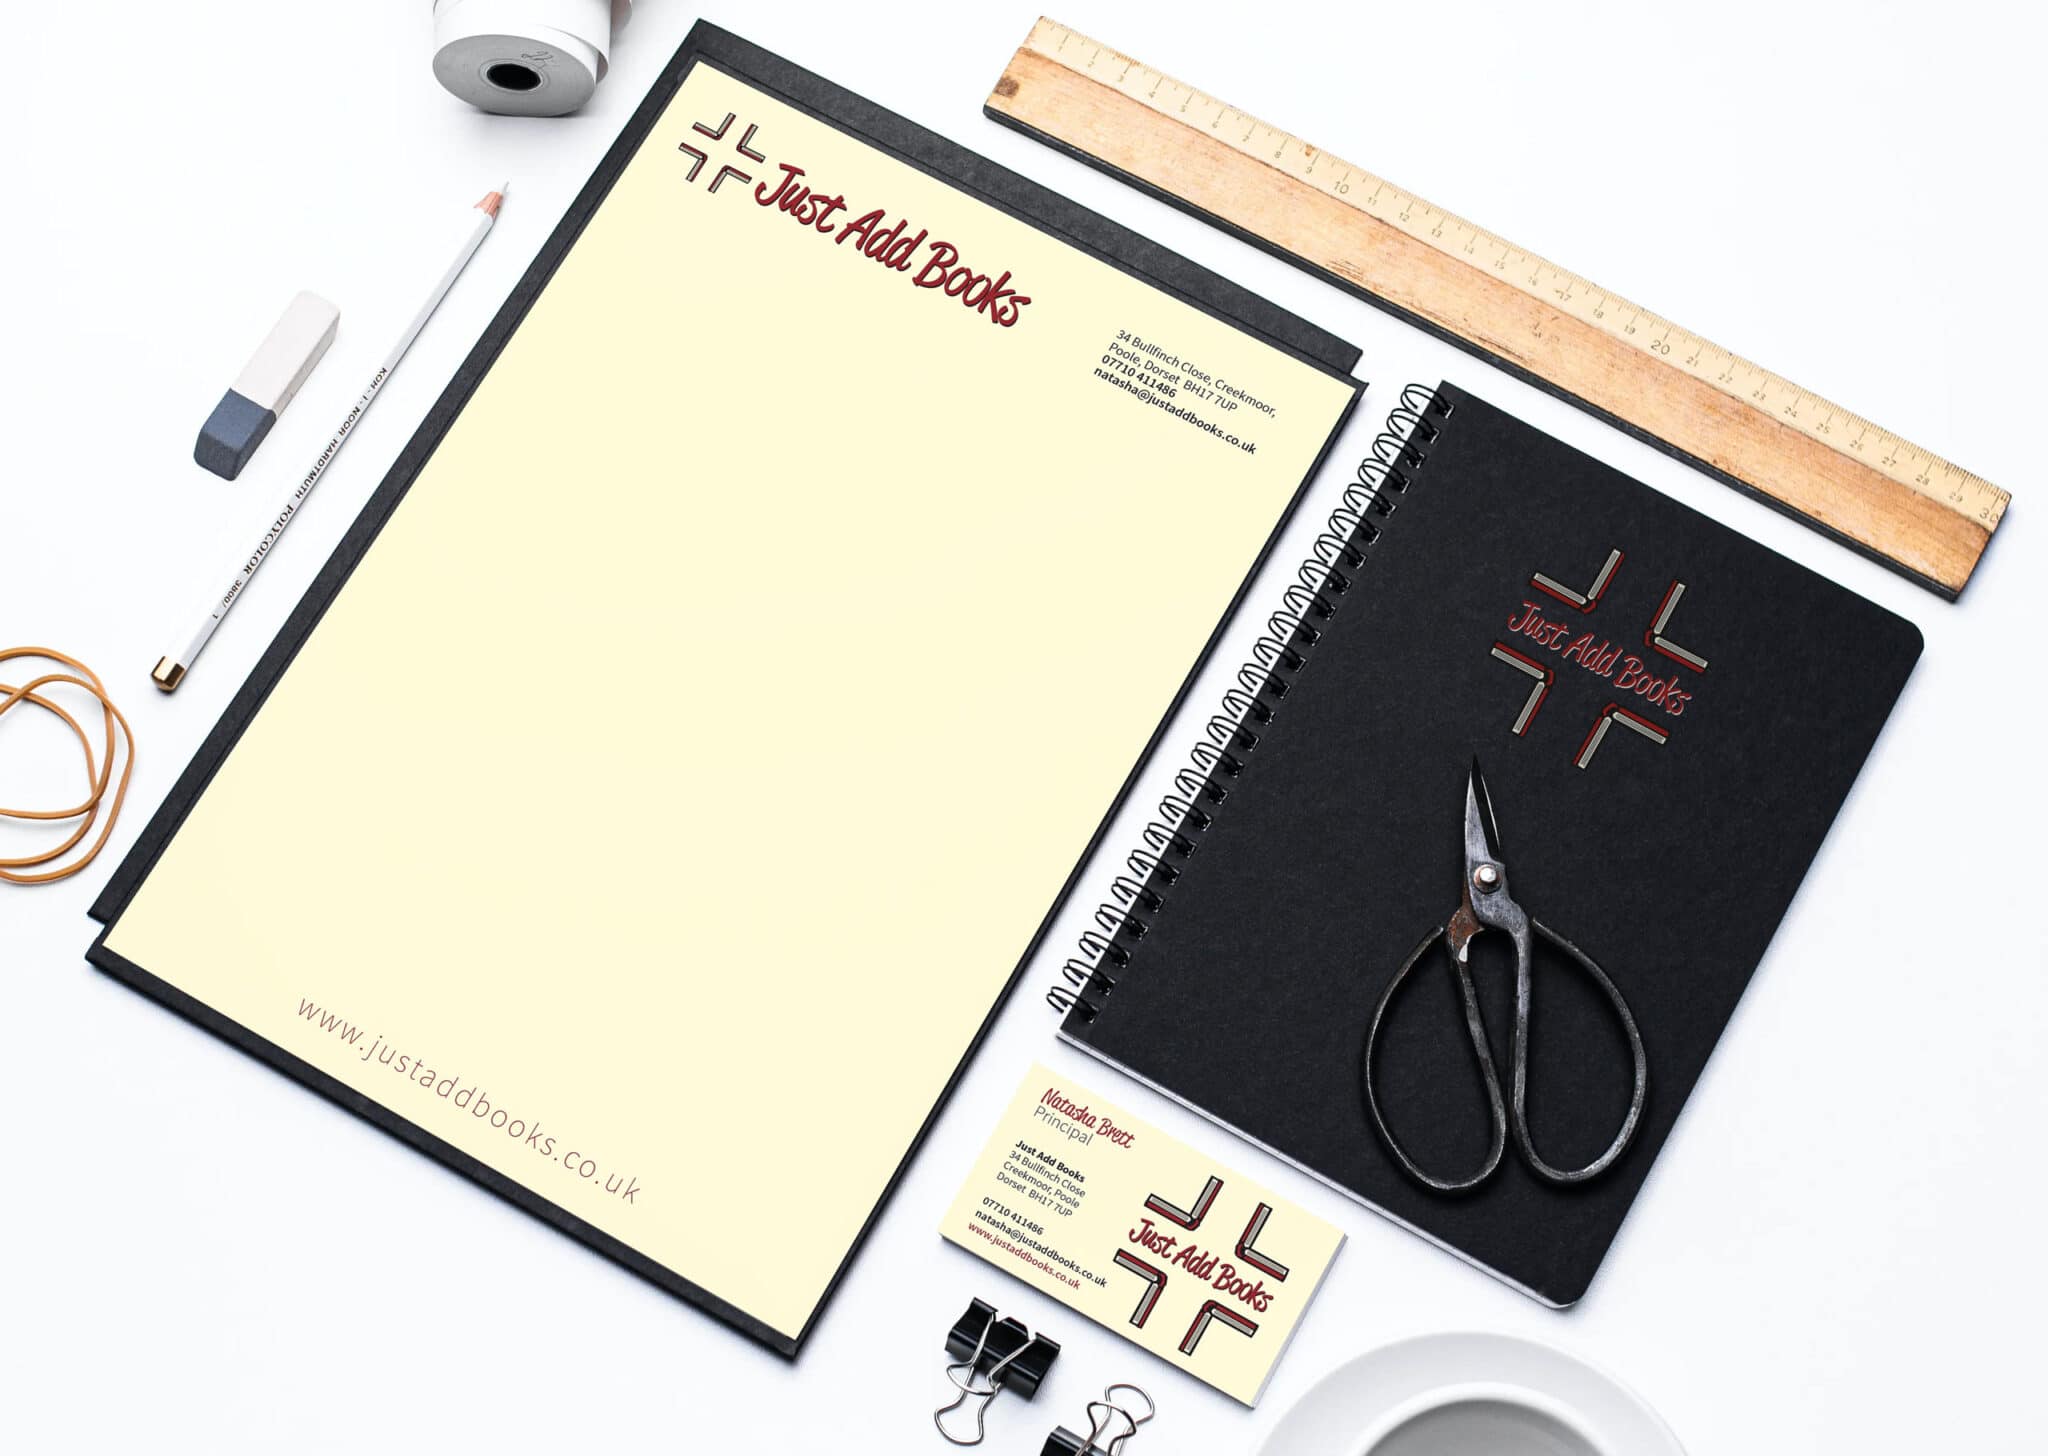 Logo Design Note Pad And Stationery Design And Print